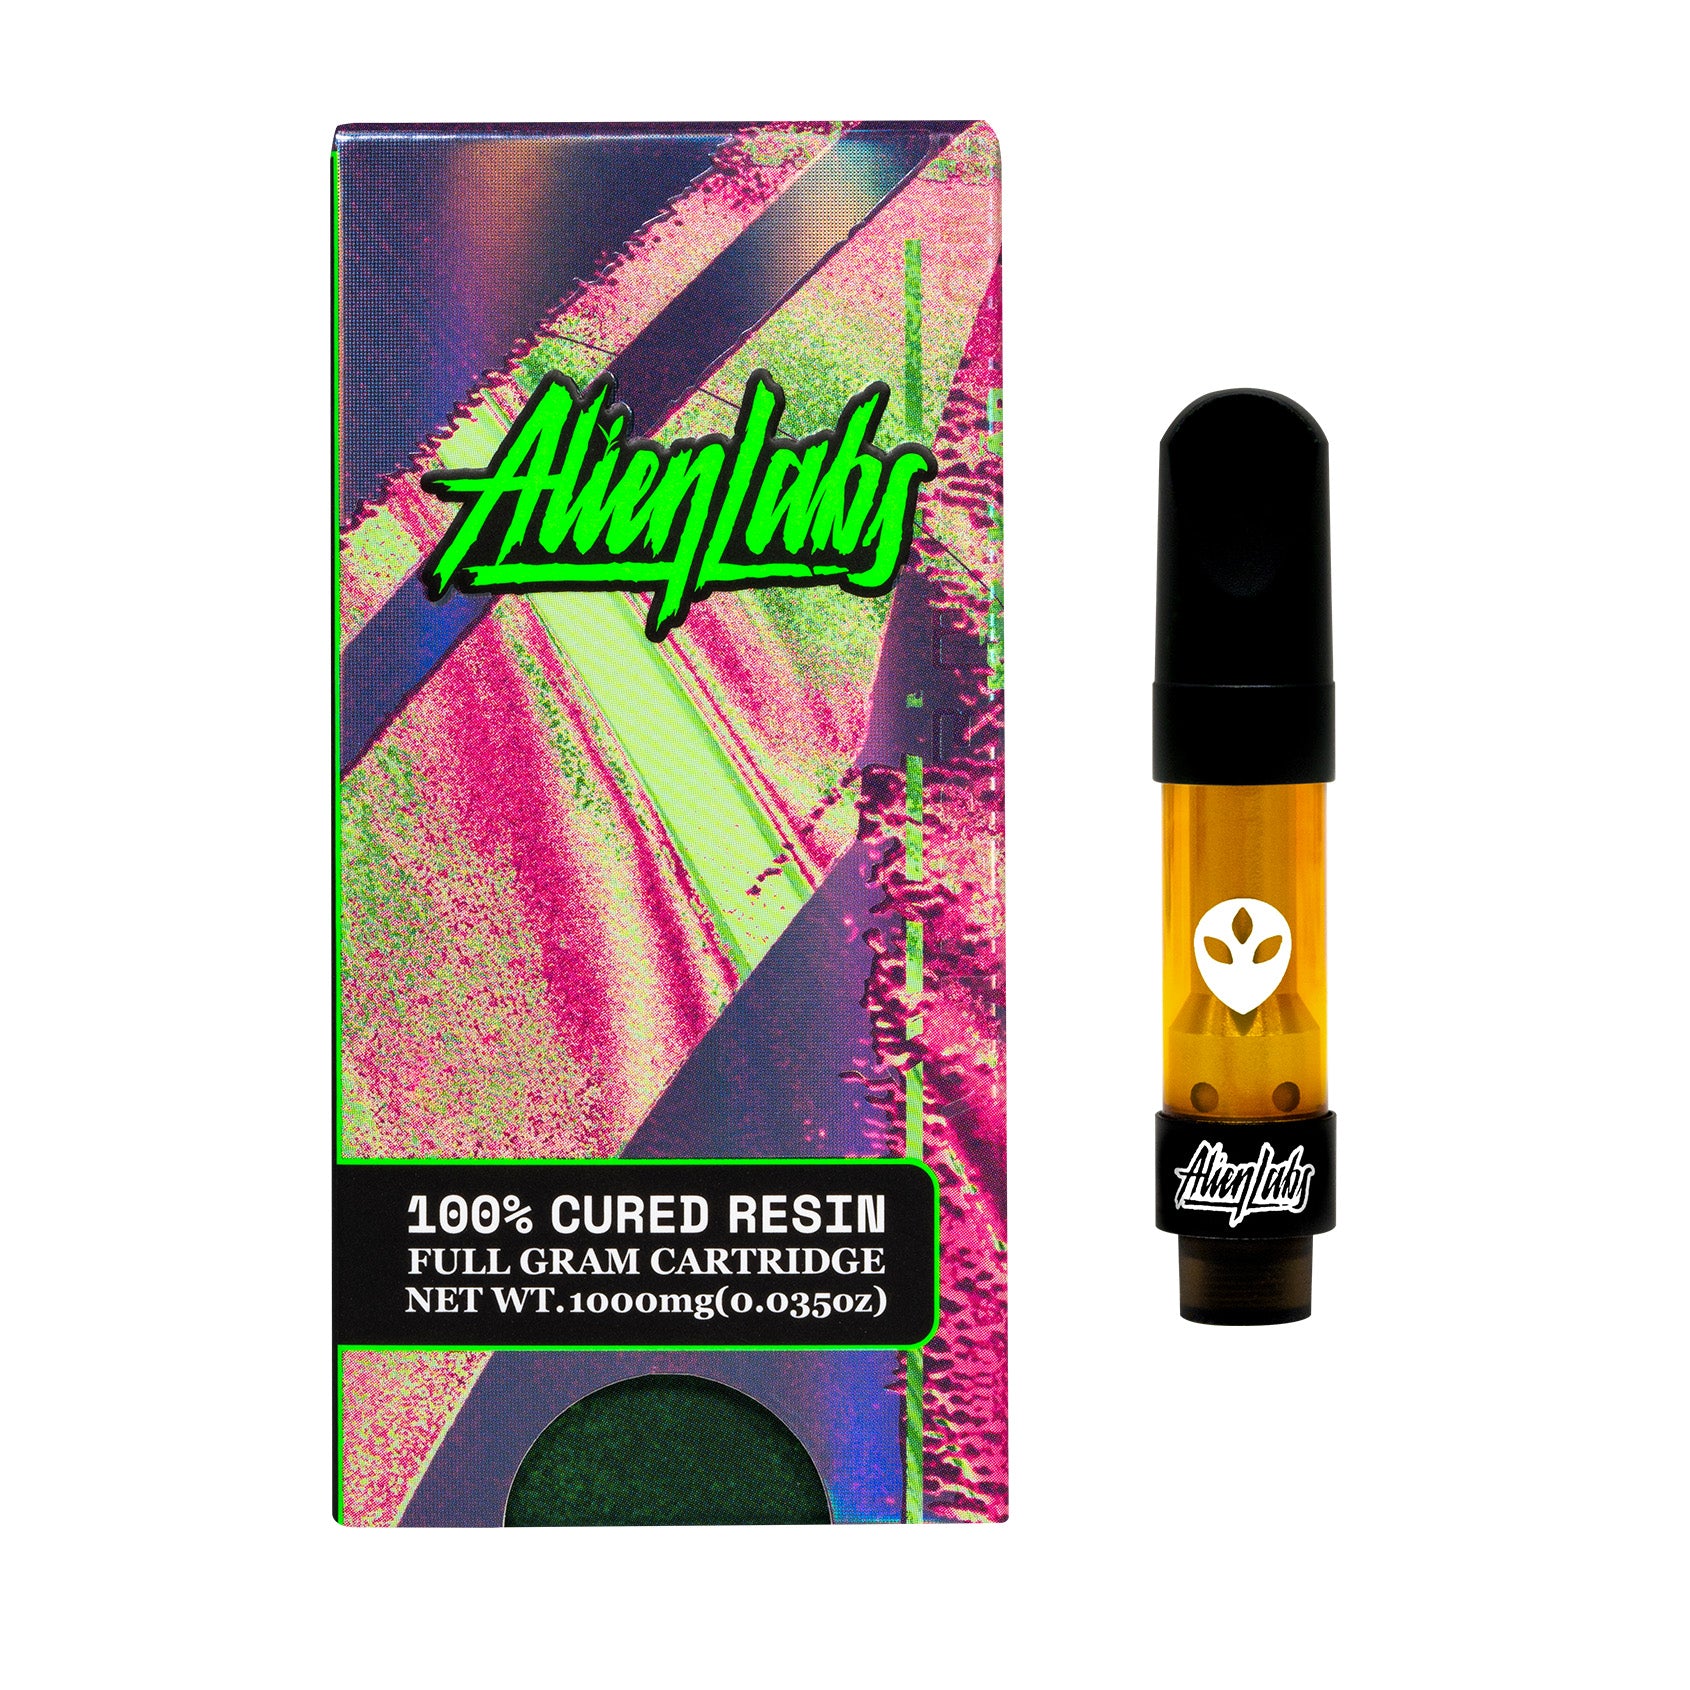 Agent X Cured Resin Cartridge (1G)